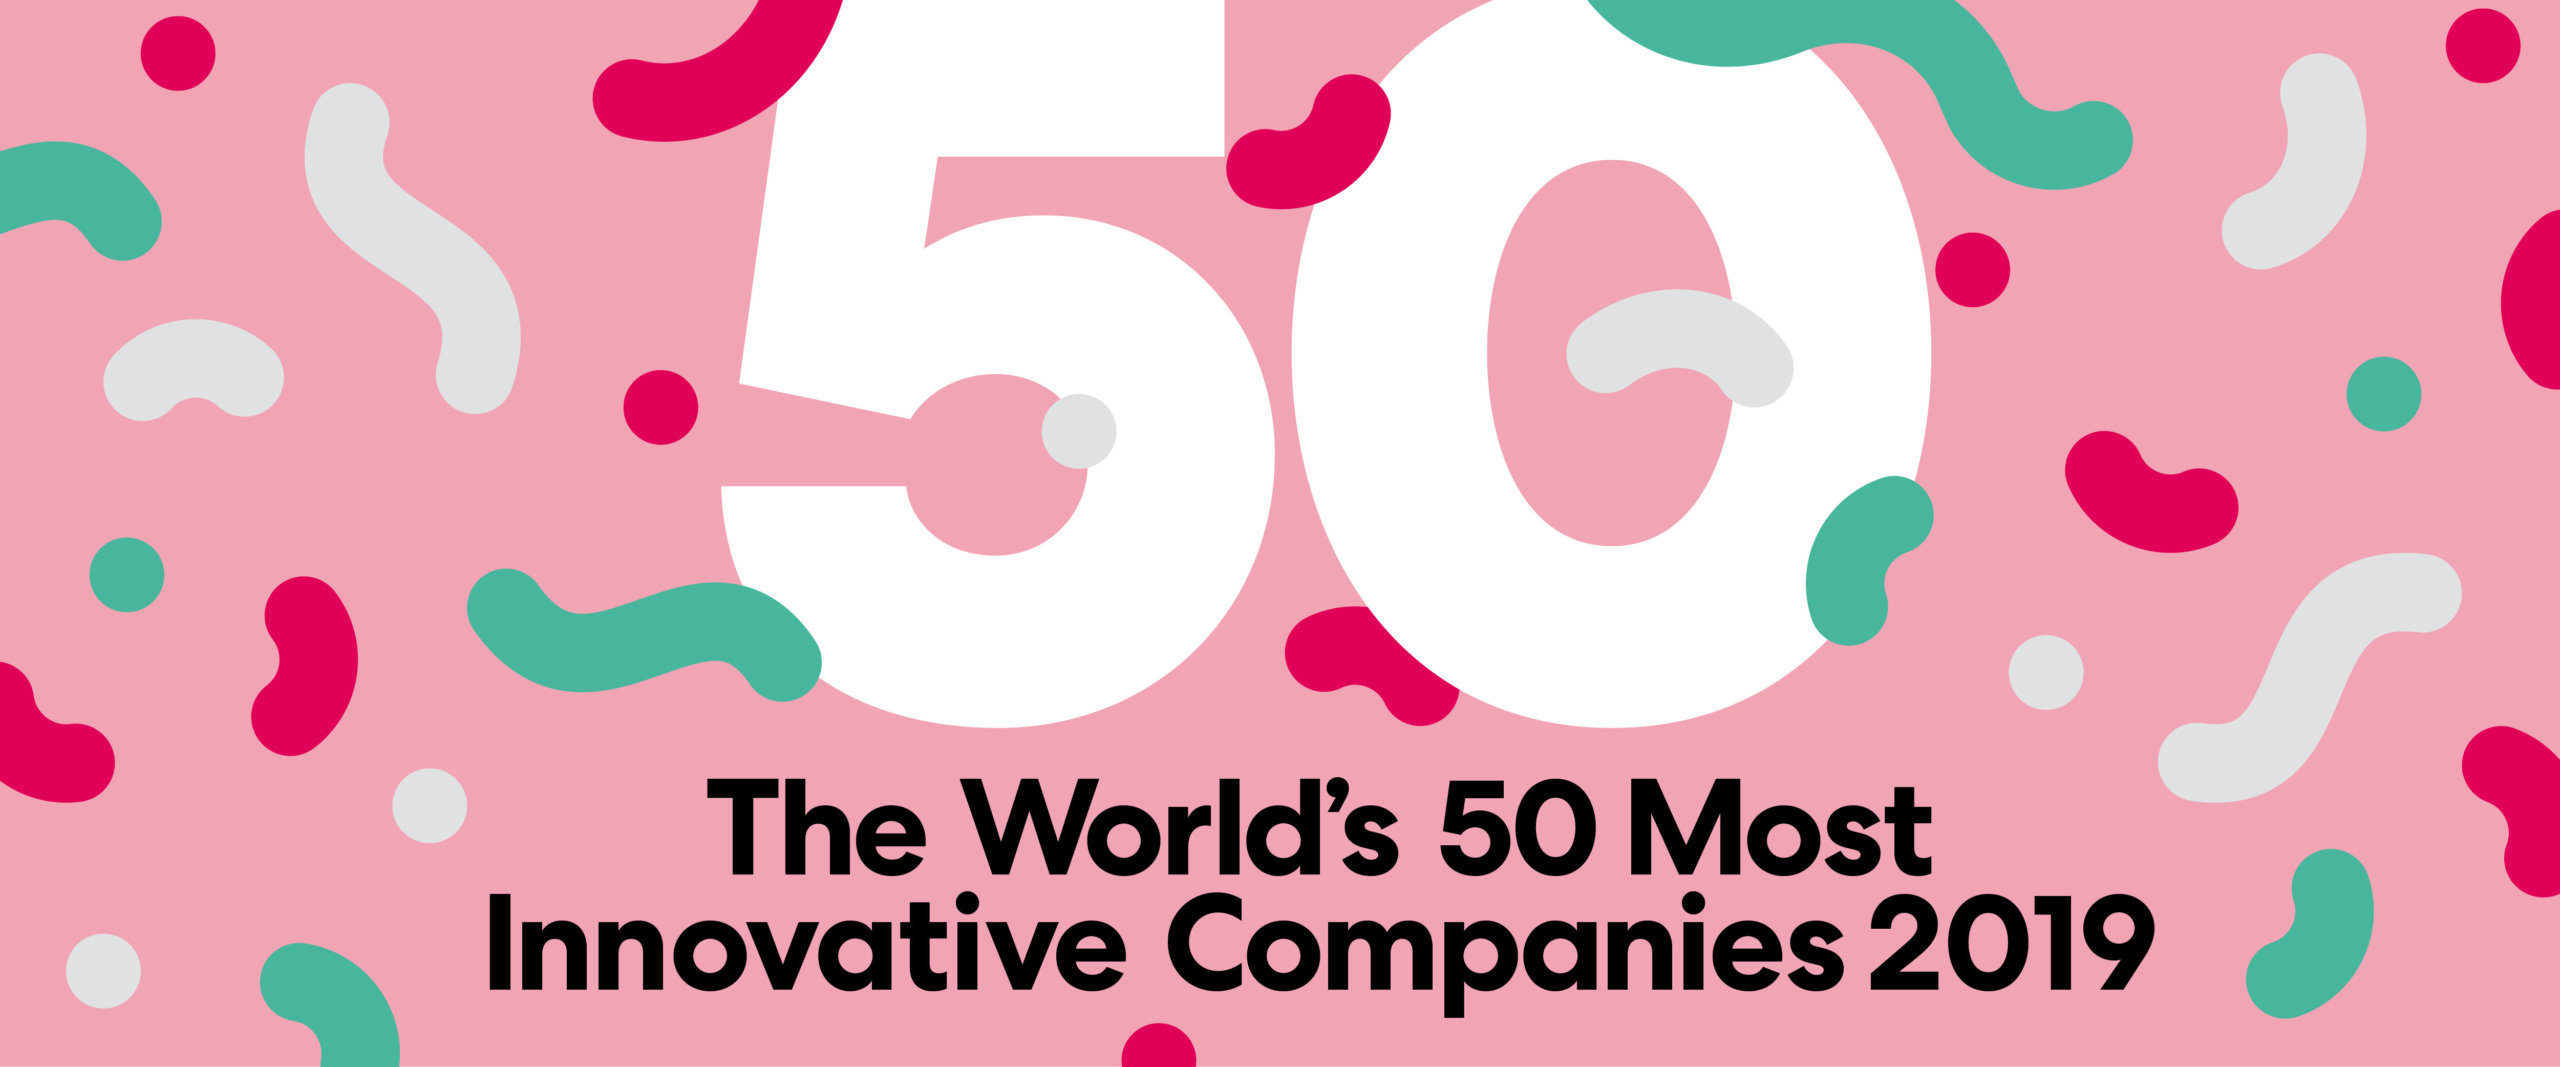 The World's 50 Most Innovative Companies 2019